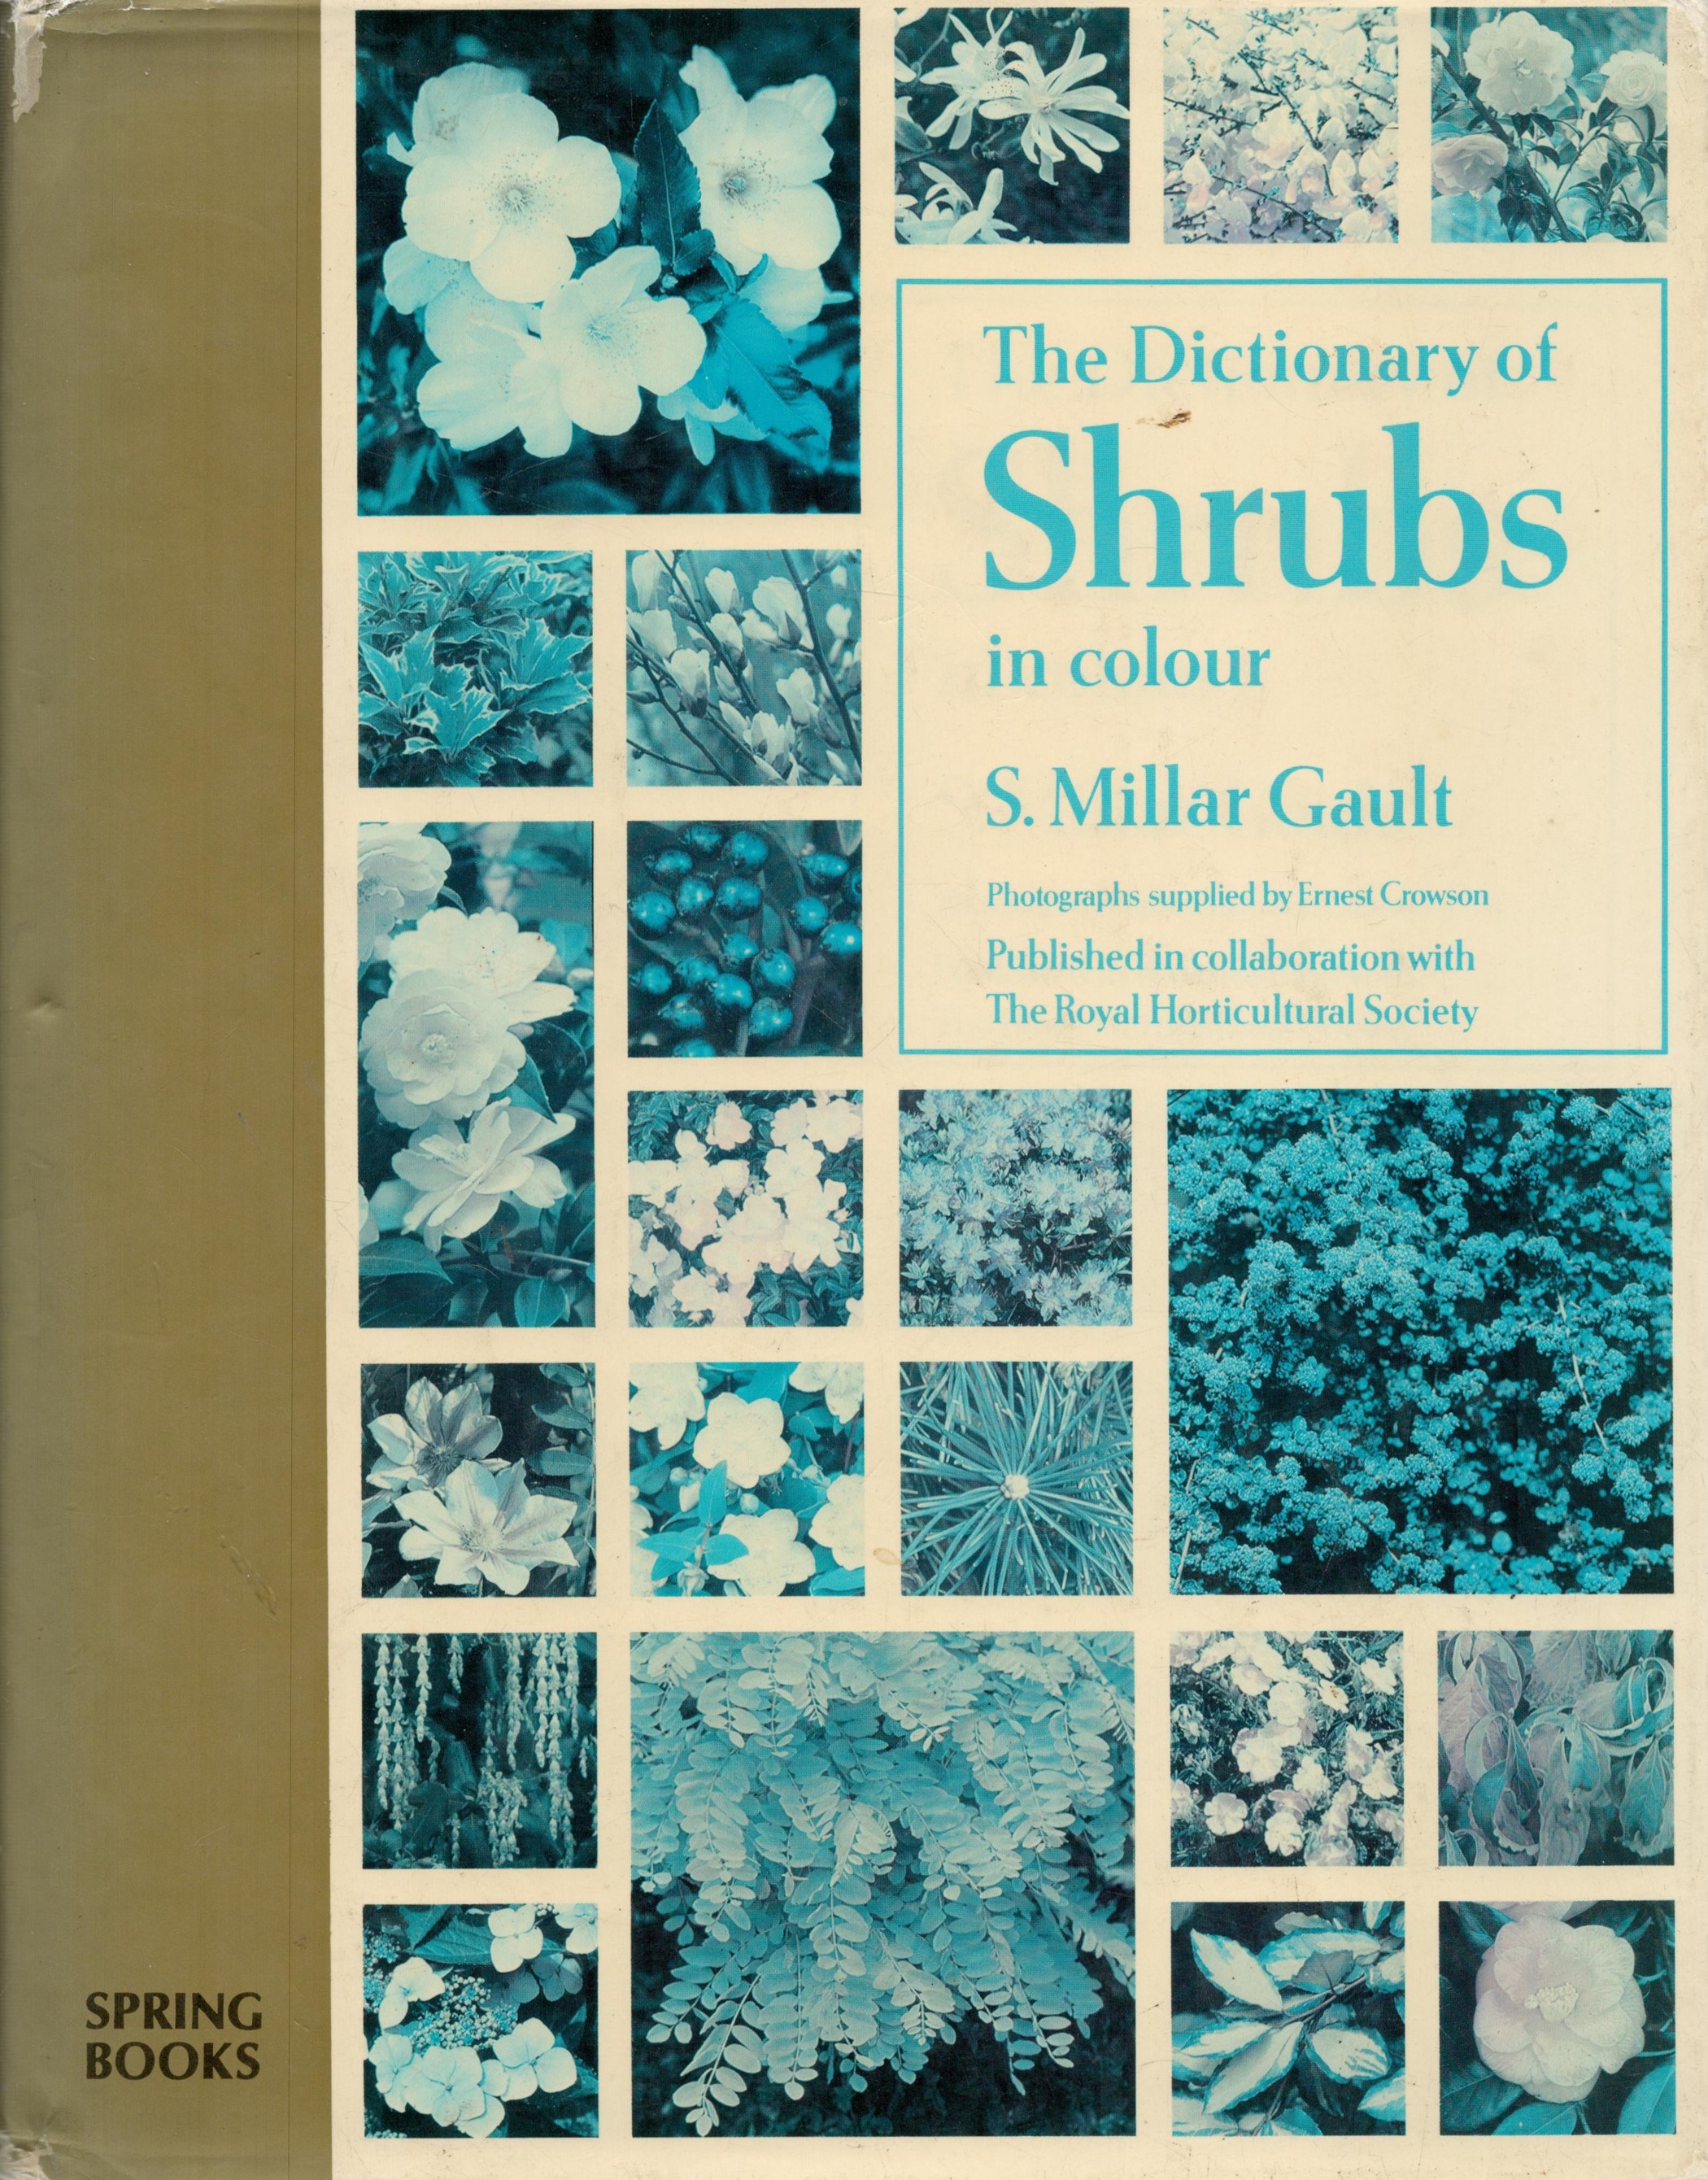 The Dictionary of Shrubs in Colour by S Millar Gault 1988 Second Edition Hardback Book with 208